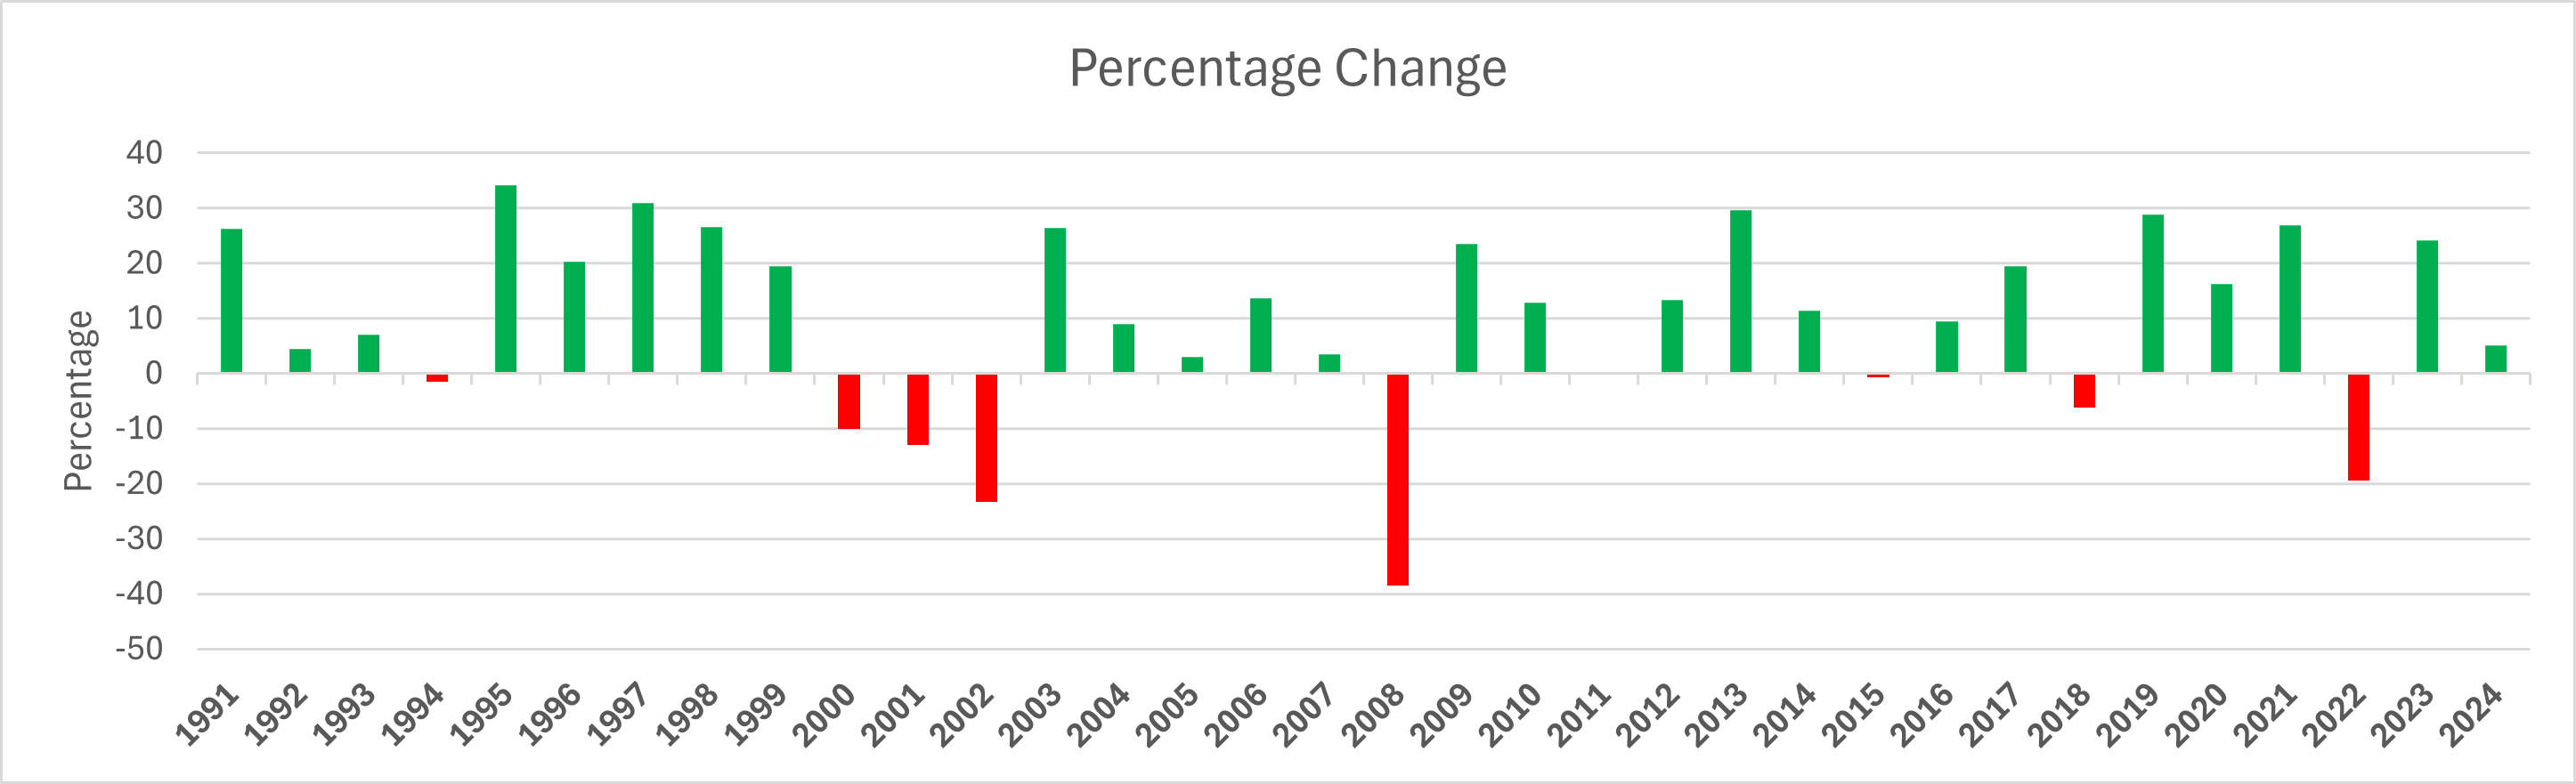 S&P 500 chart with percentage changes